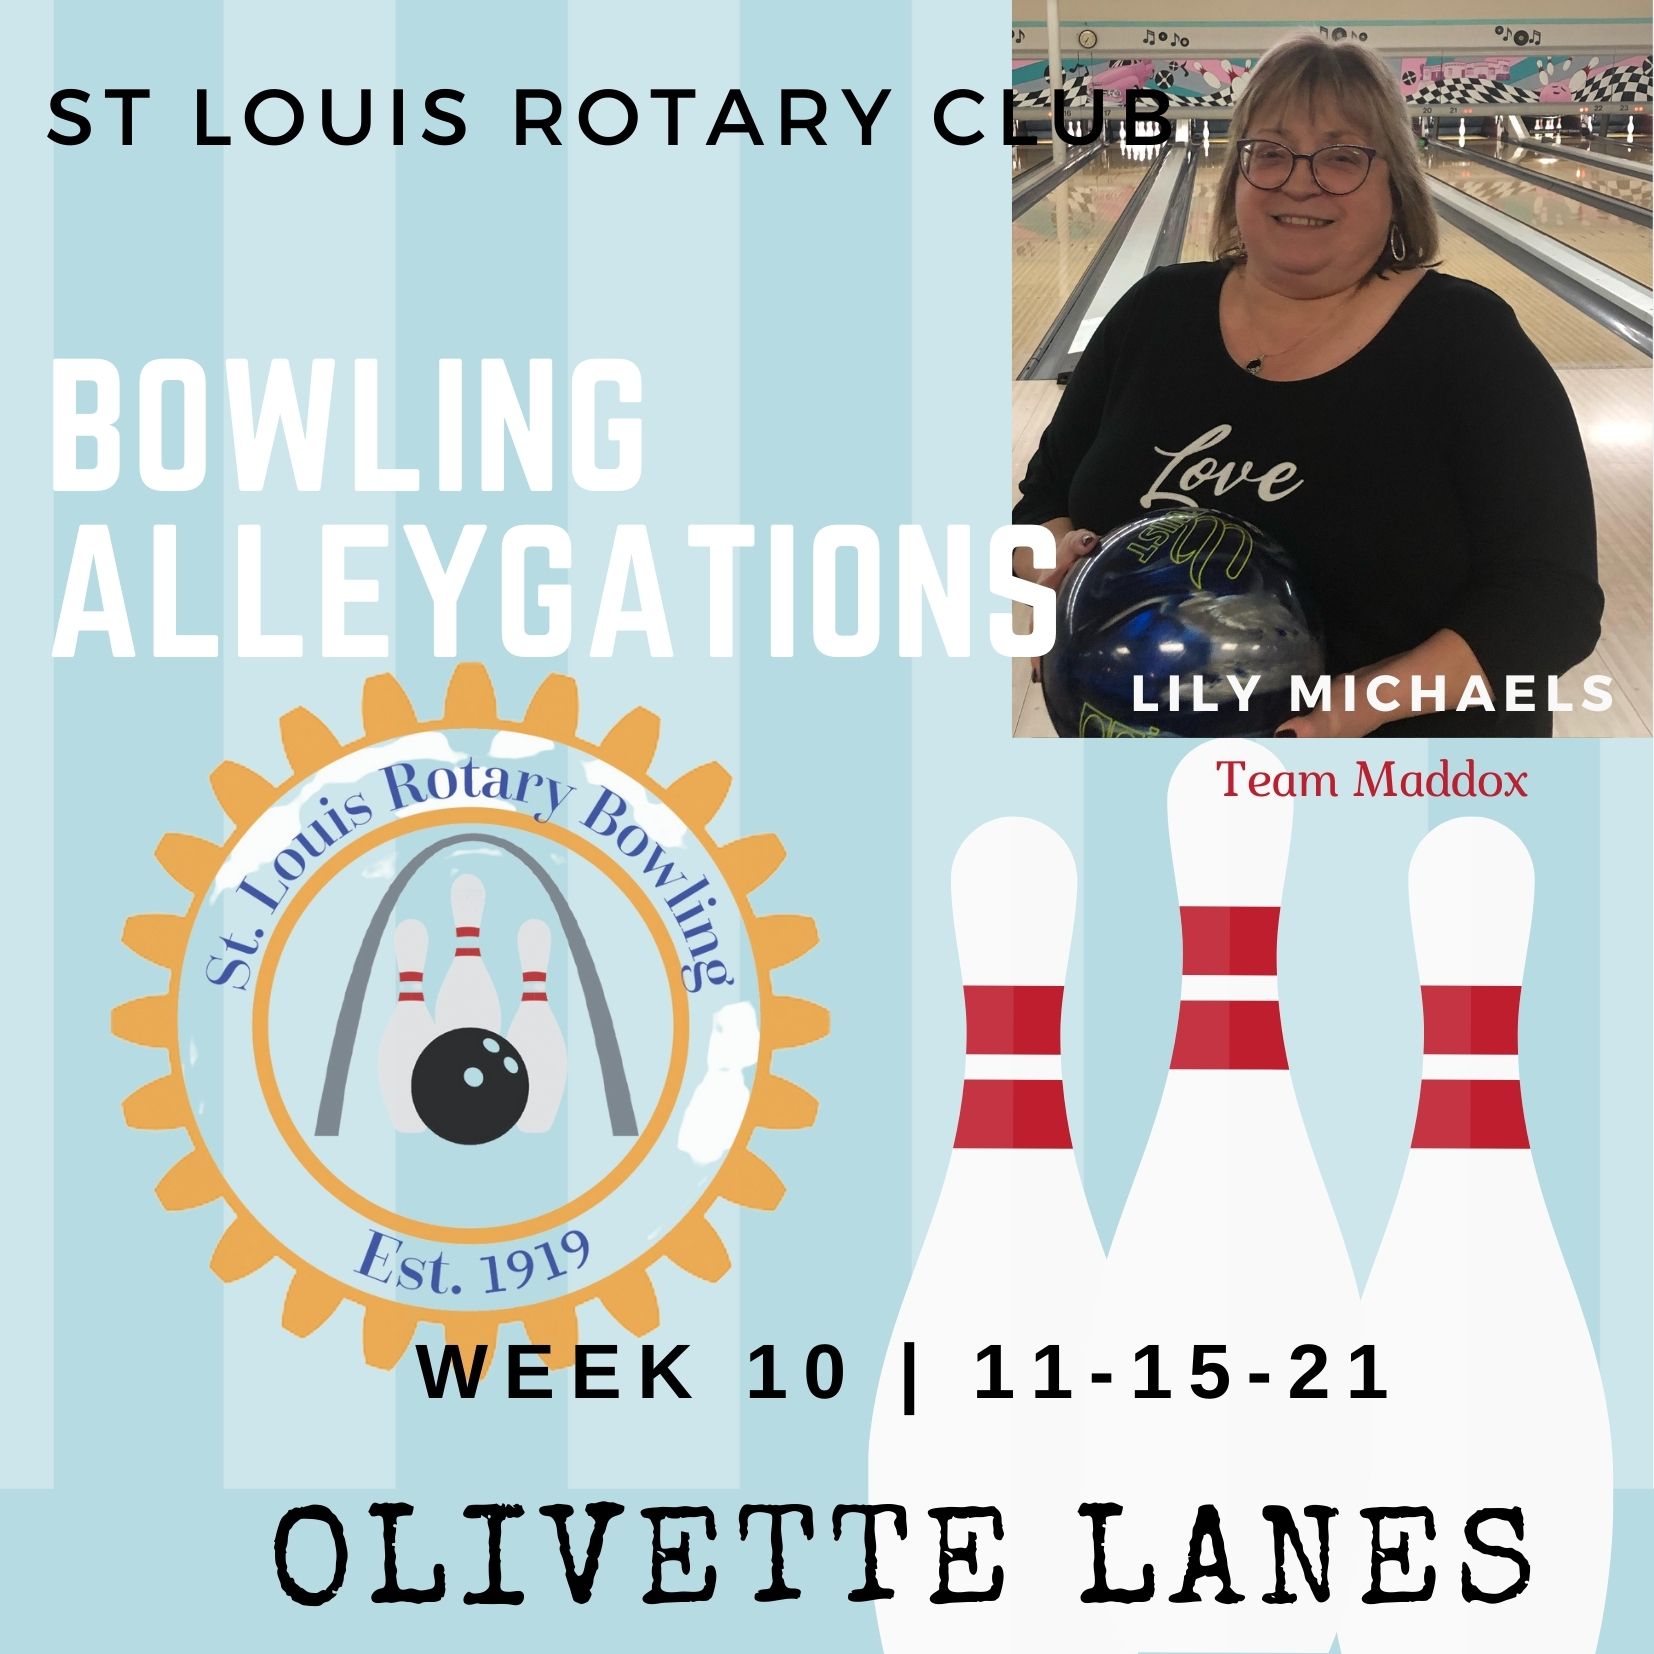 Bowling Alleygations Week 10 _ 11-15-21